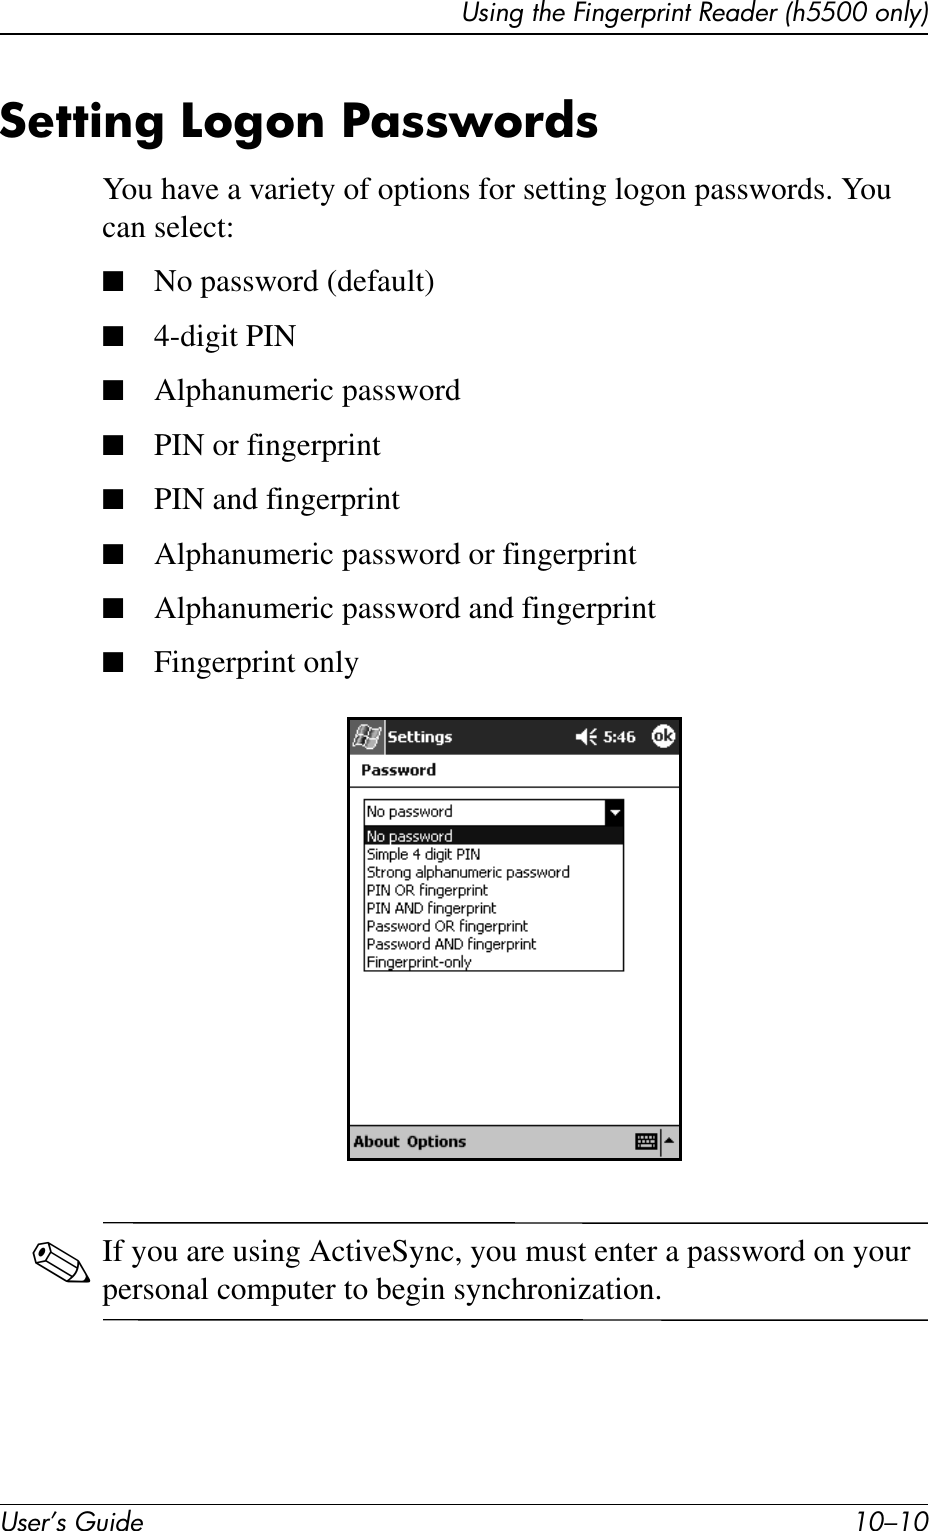 User’s Guide 10–10Using the Fingerprint Reader (h5500 only)Setting Logon PasswordsYou have a variety of options for setting logon passwords. You can select:■No password (default)■4-digit PIN■Alphanumeric password■PIN or fingerprint■PIN and fingerprint■Alphanumeric password or fingerprint■Alphanumeric password and fingerprint■Fingerprint only✎If you are using ActiveSync, you must enter a password on your personal computer to begin synchronization.